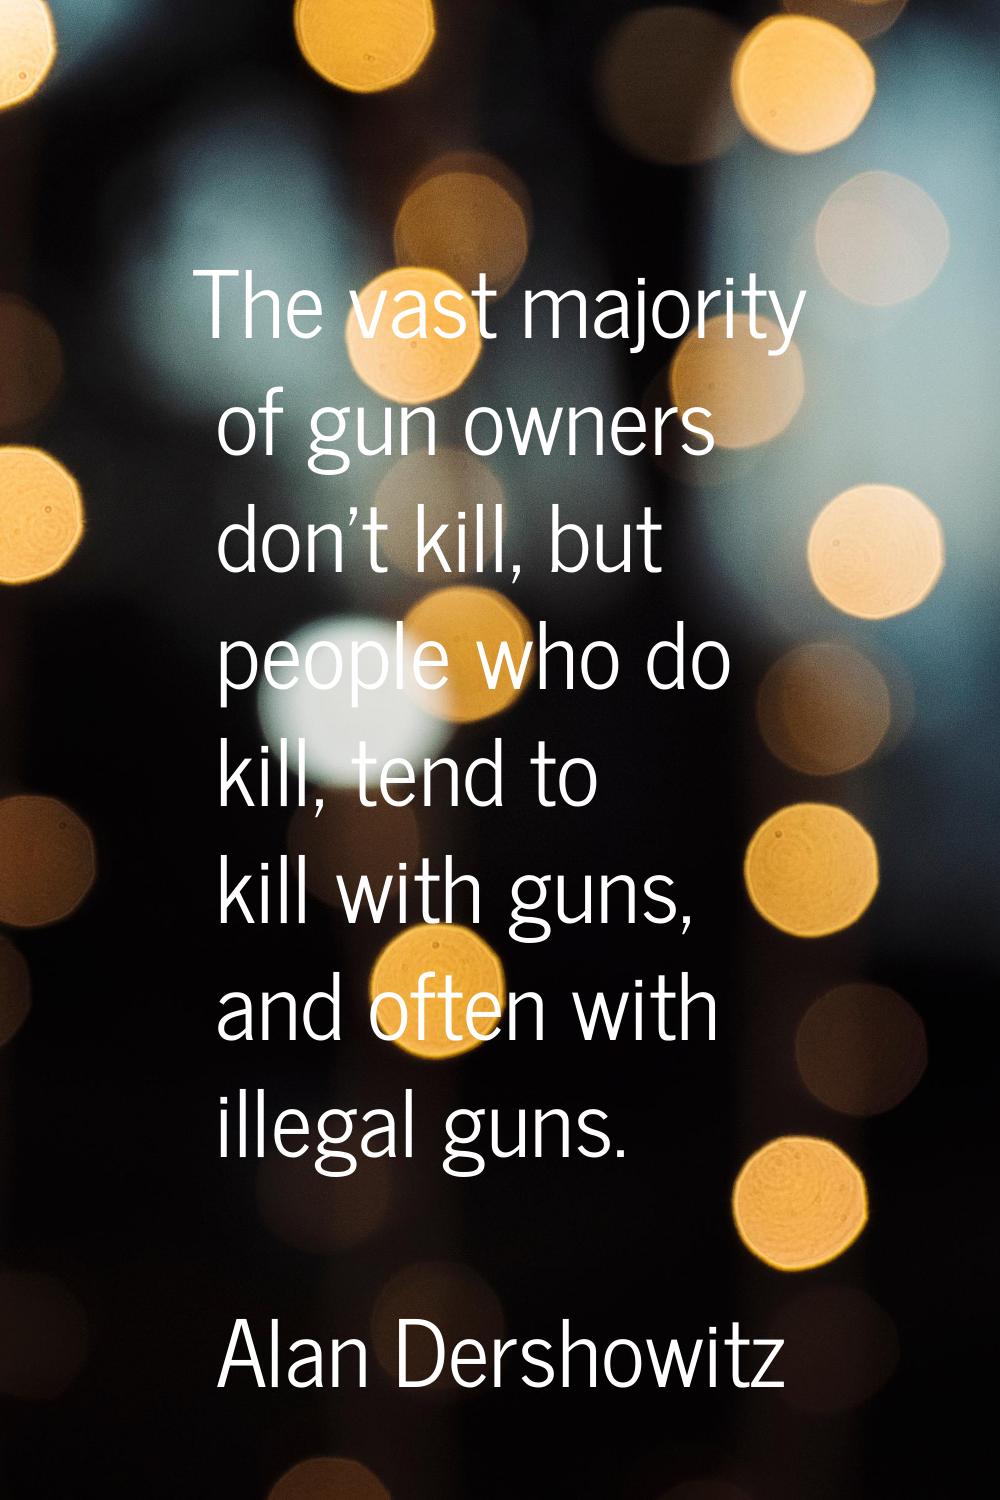 The vast majority of gun owners don't kill, but people who do kill, tend to kill with guns, and oft